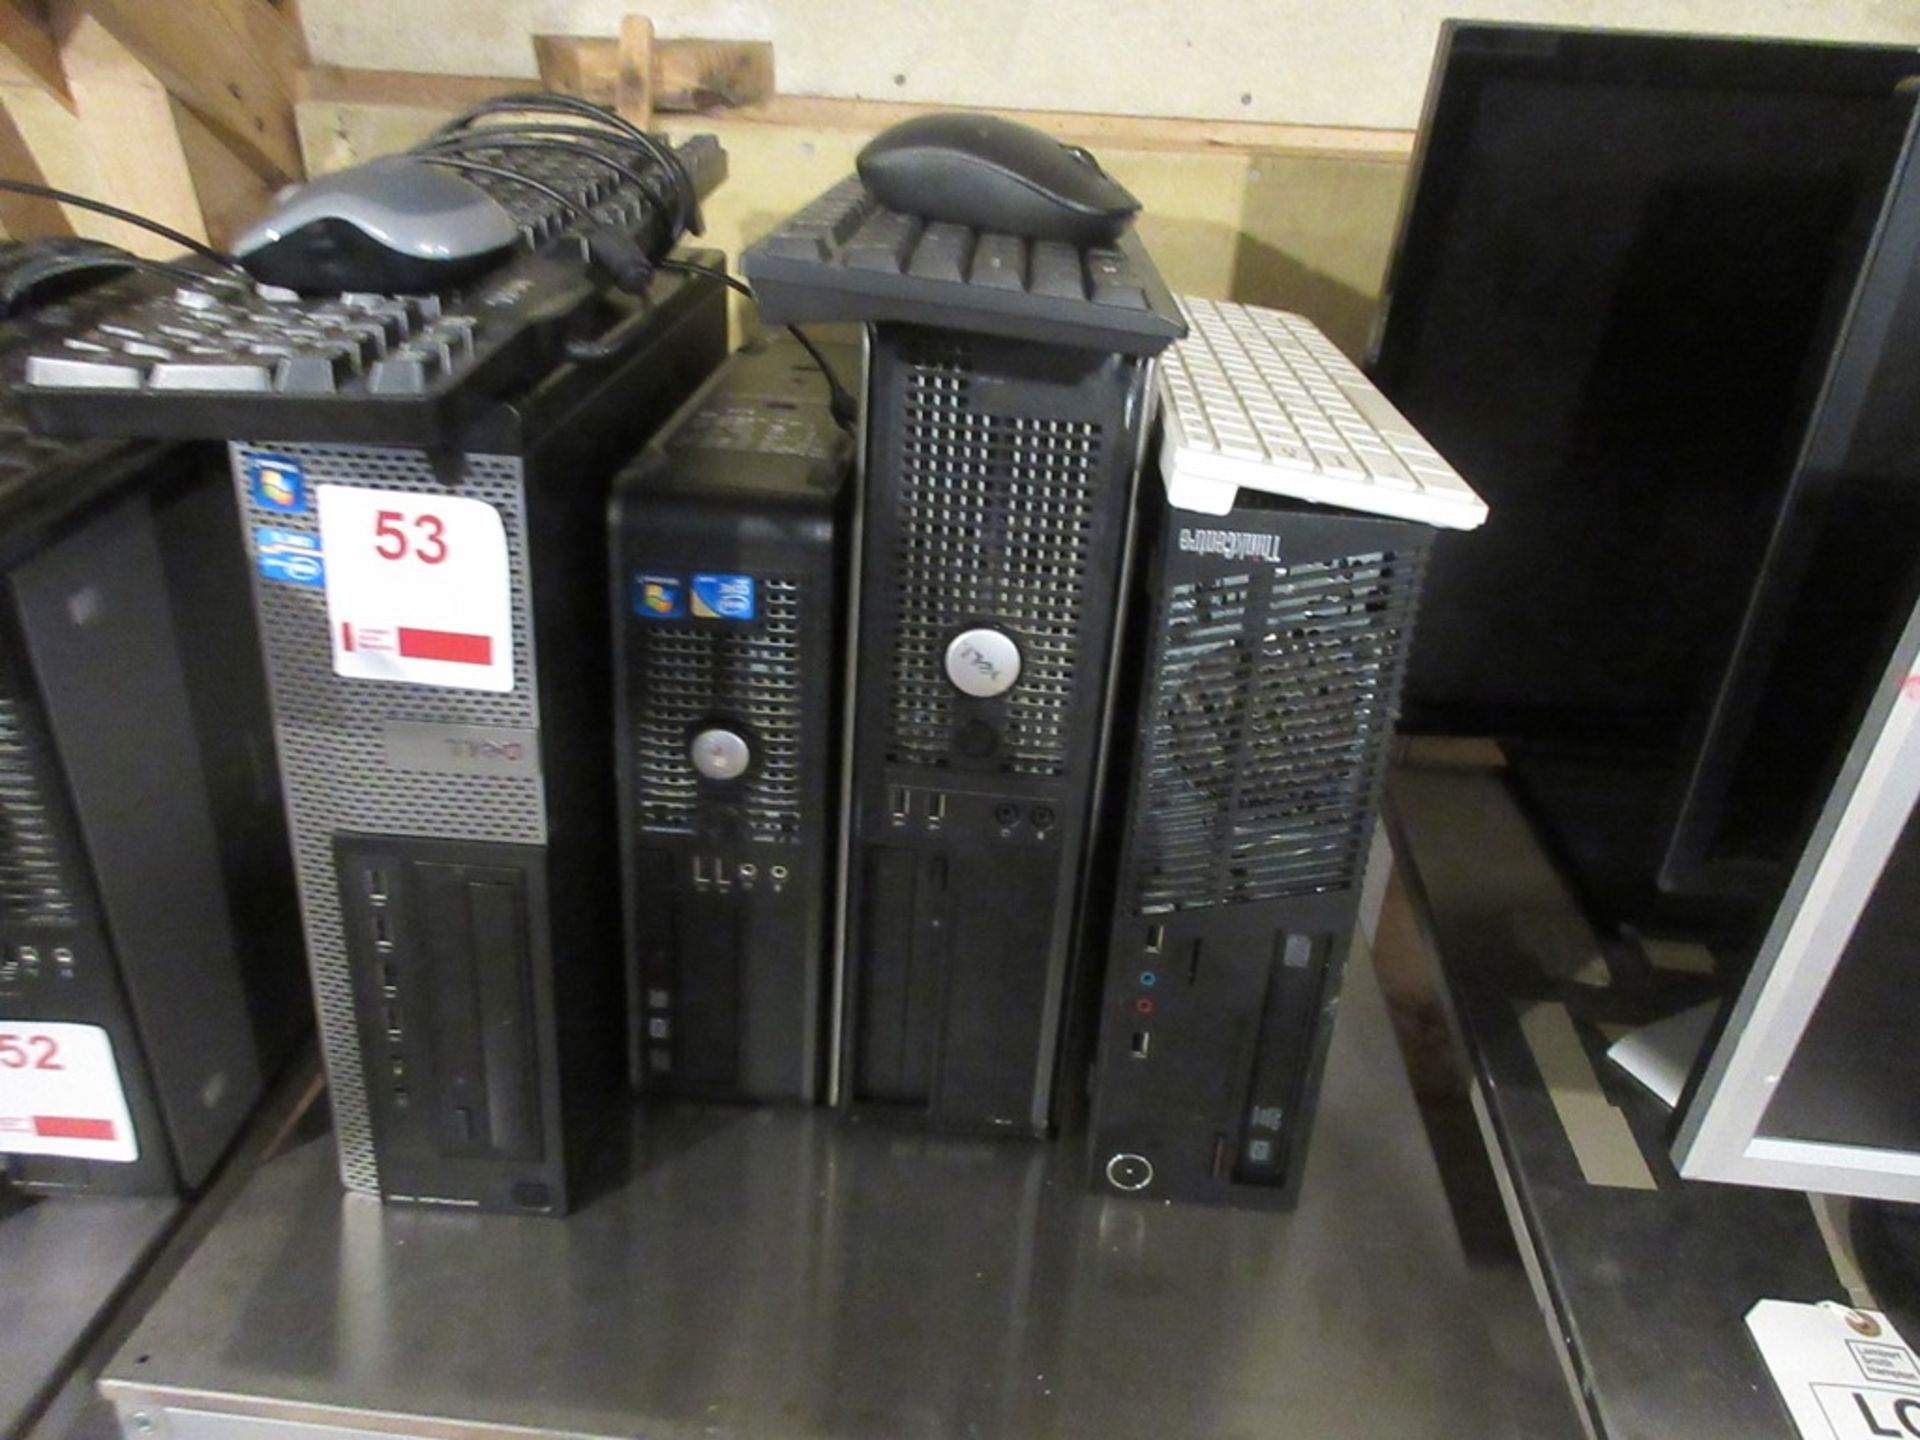 Four various computer towers, 3 x flat screen monitors, 3 x keyboards, 2 x mice